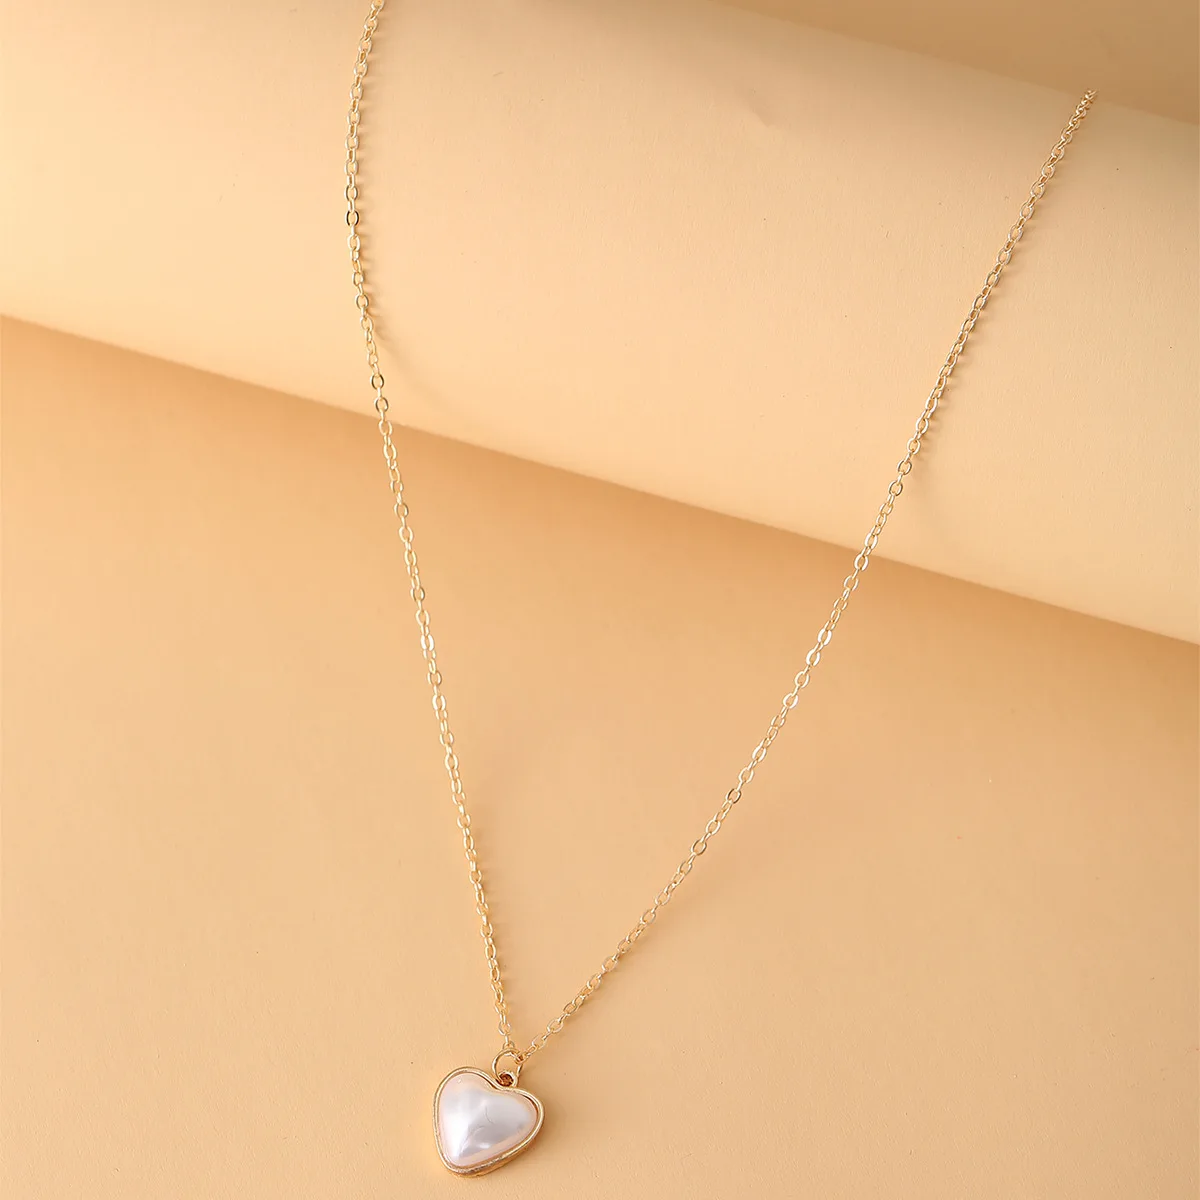 

2021 Fashion Creative Simple Retro Charming Minimalist Necklace Pearl Heart Pendant Alloy Clavicle Chain Necklace, As pic